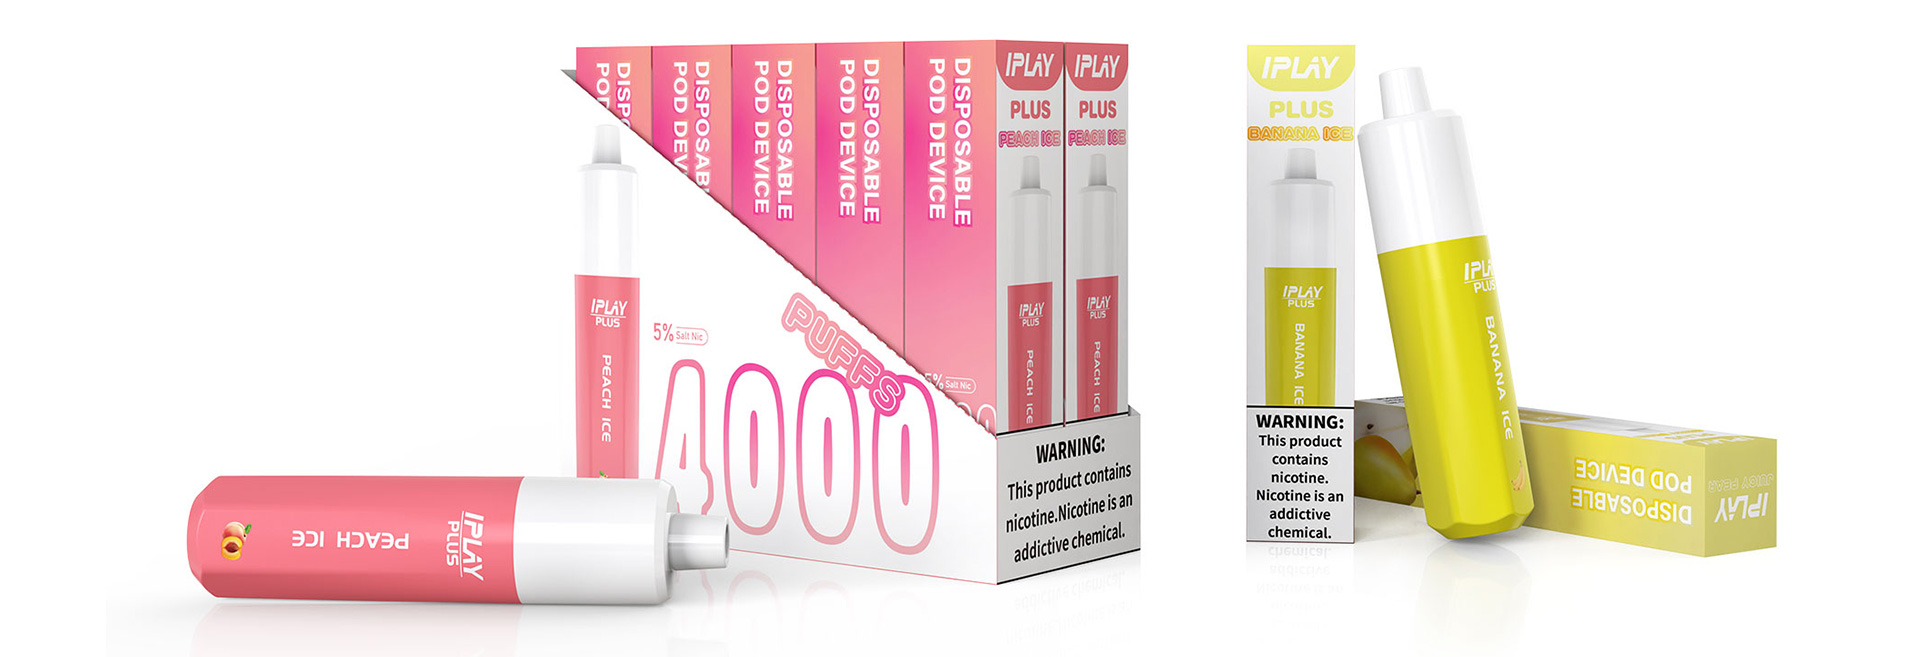 IPLAY PLUS 4000 Puffs Disposable Vape - Package